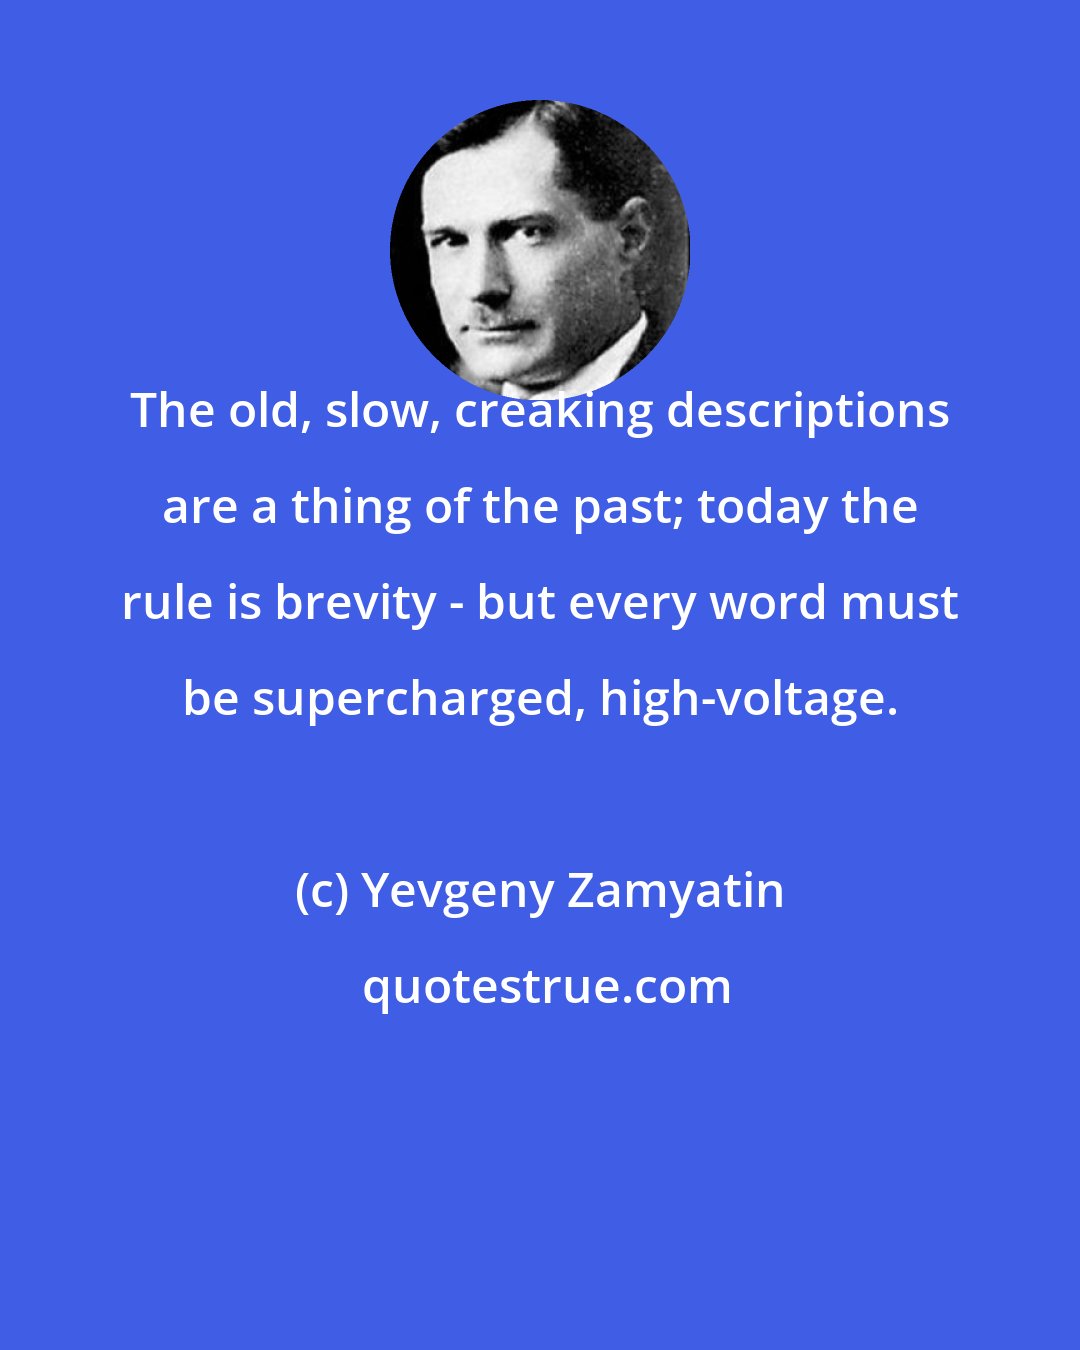 Yevgeny Zamyatin: The old, slow, creaking descriptions are a thing of the past; today the rule is brevity - but every word must be supercharged, high-voltage.